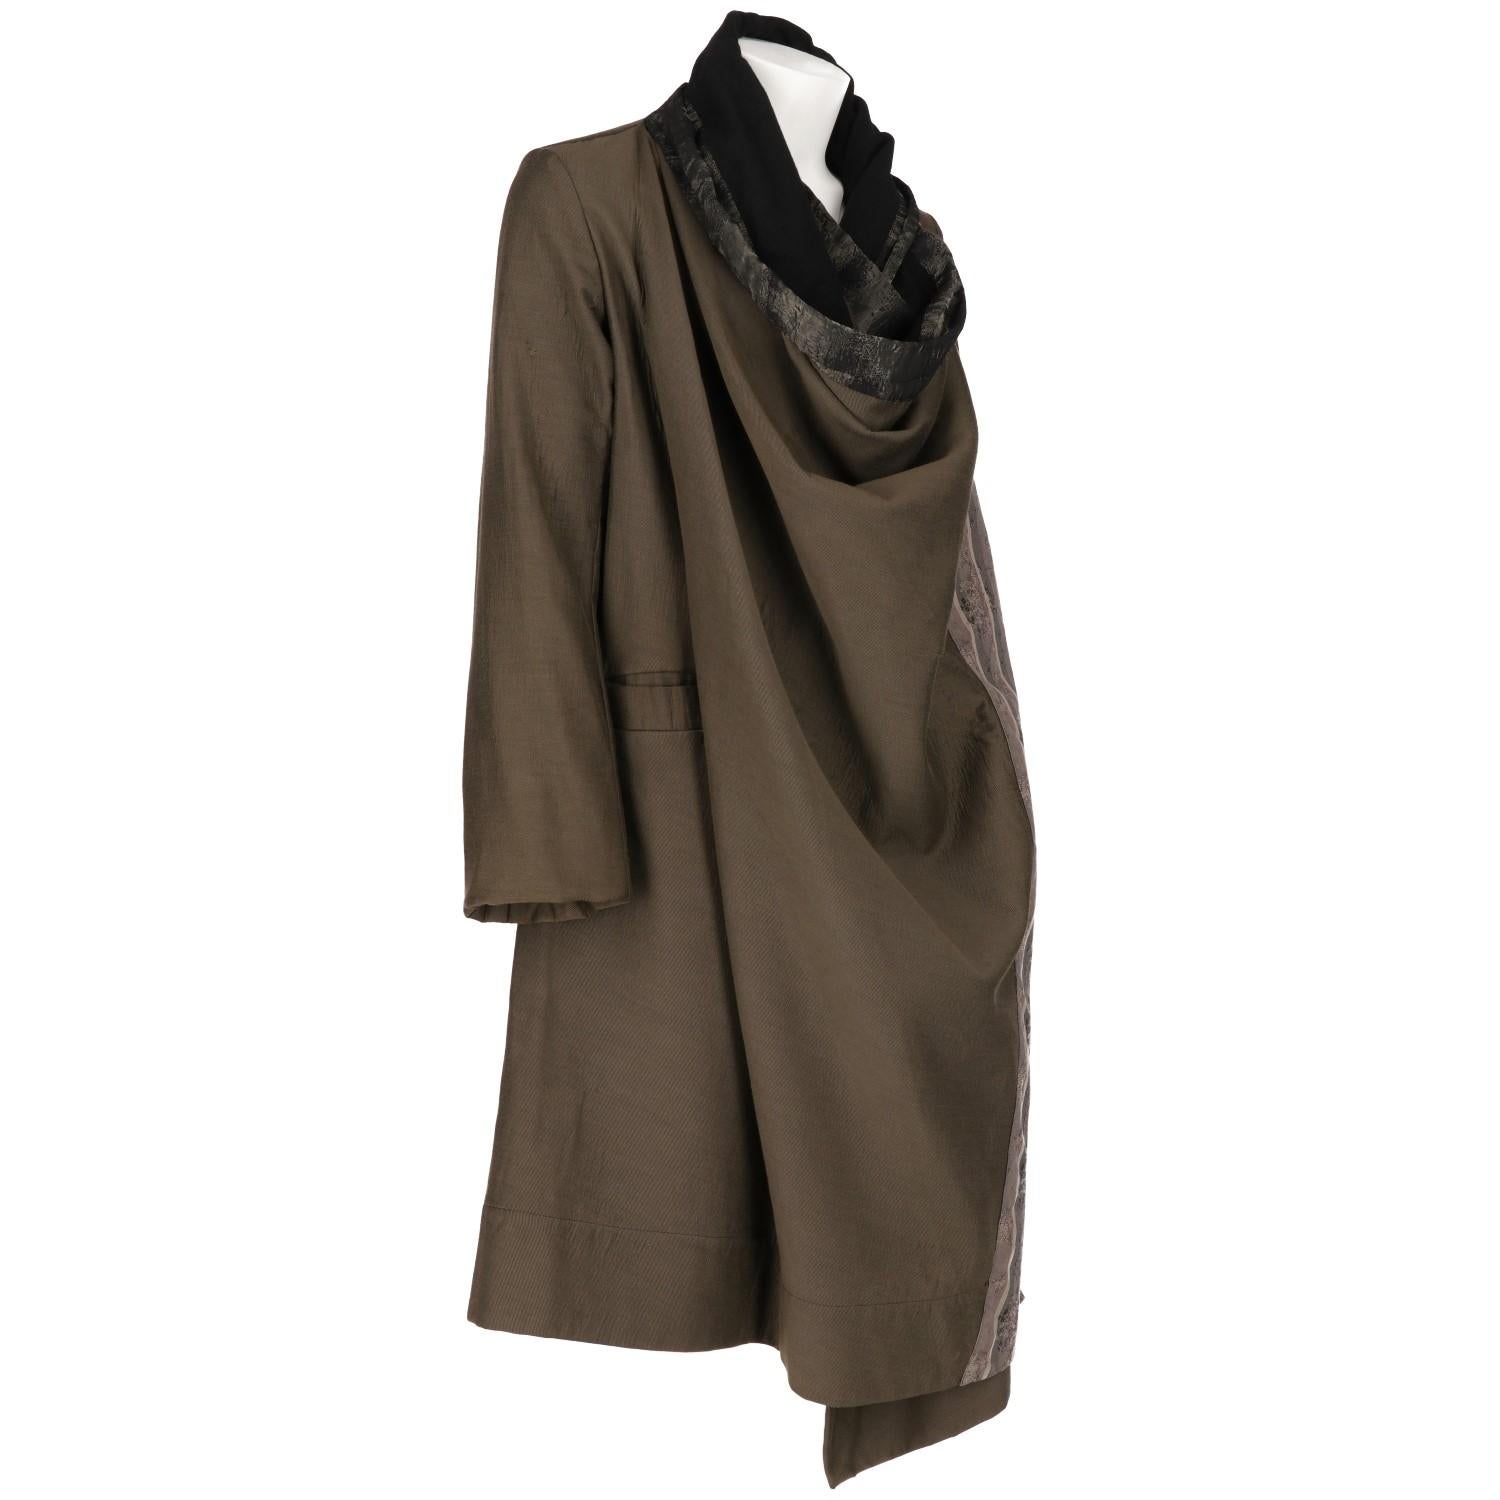 Marvelous Antonio Marras coat in khaki blend cotton fabric with contrasting striped panels. It features an asymmetric and loosing style, and wrap closure with buttons on the shoulders. Two wide welt pockets. Lined in black.

The item is in good